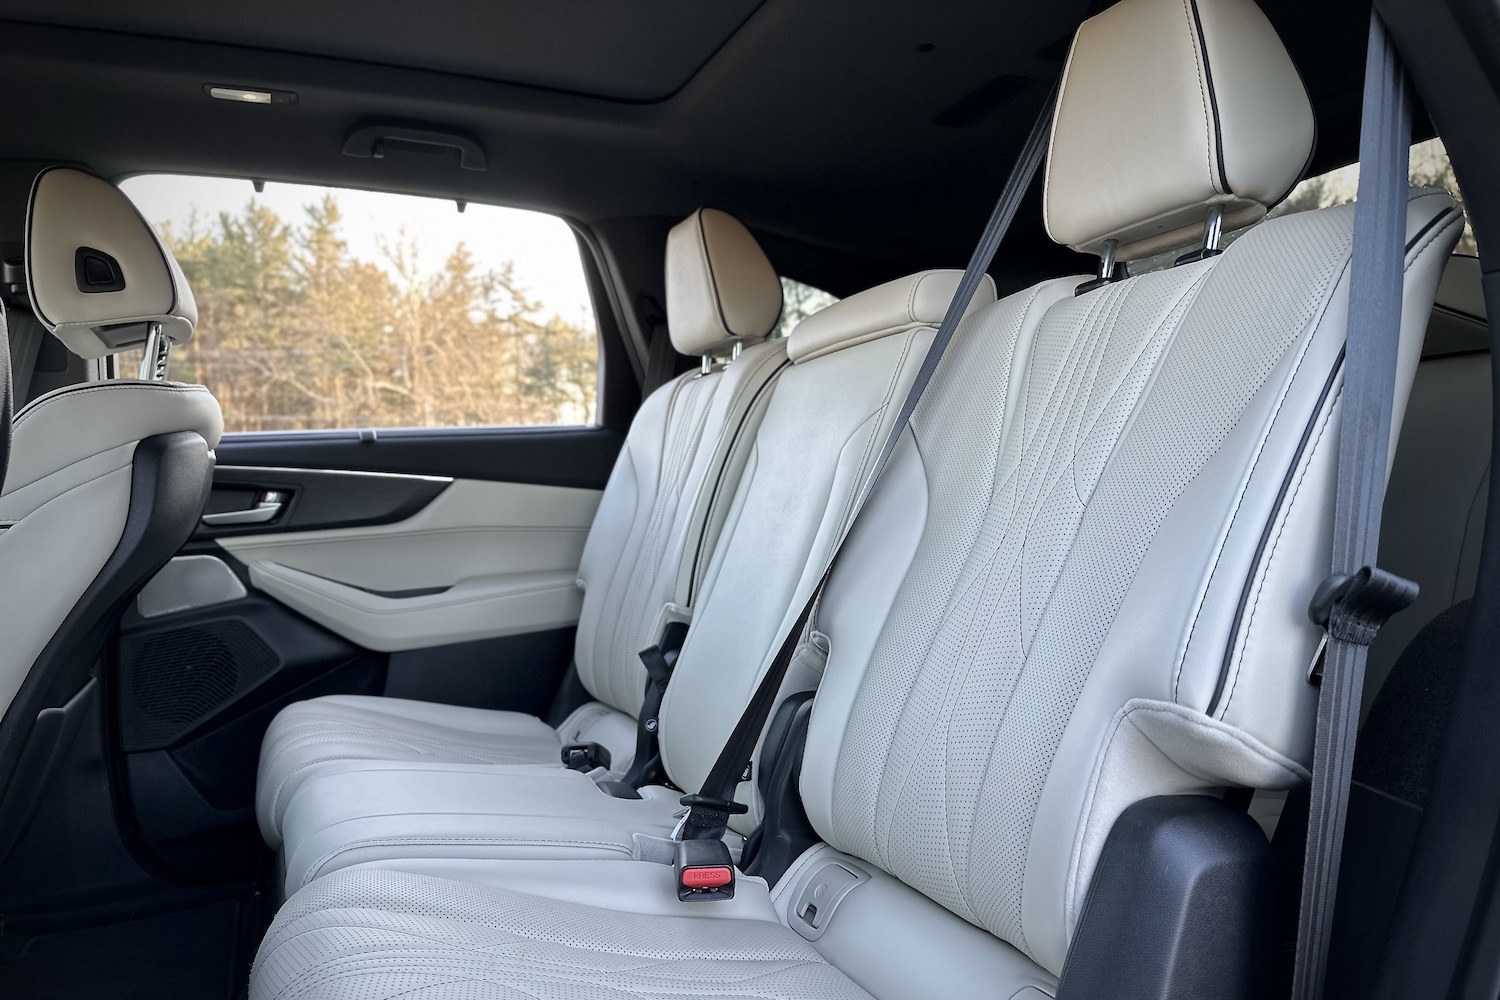 Rear seats in the 2022 Acura MDX Type S from outside the vehicle with trees in the back.